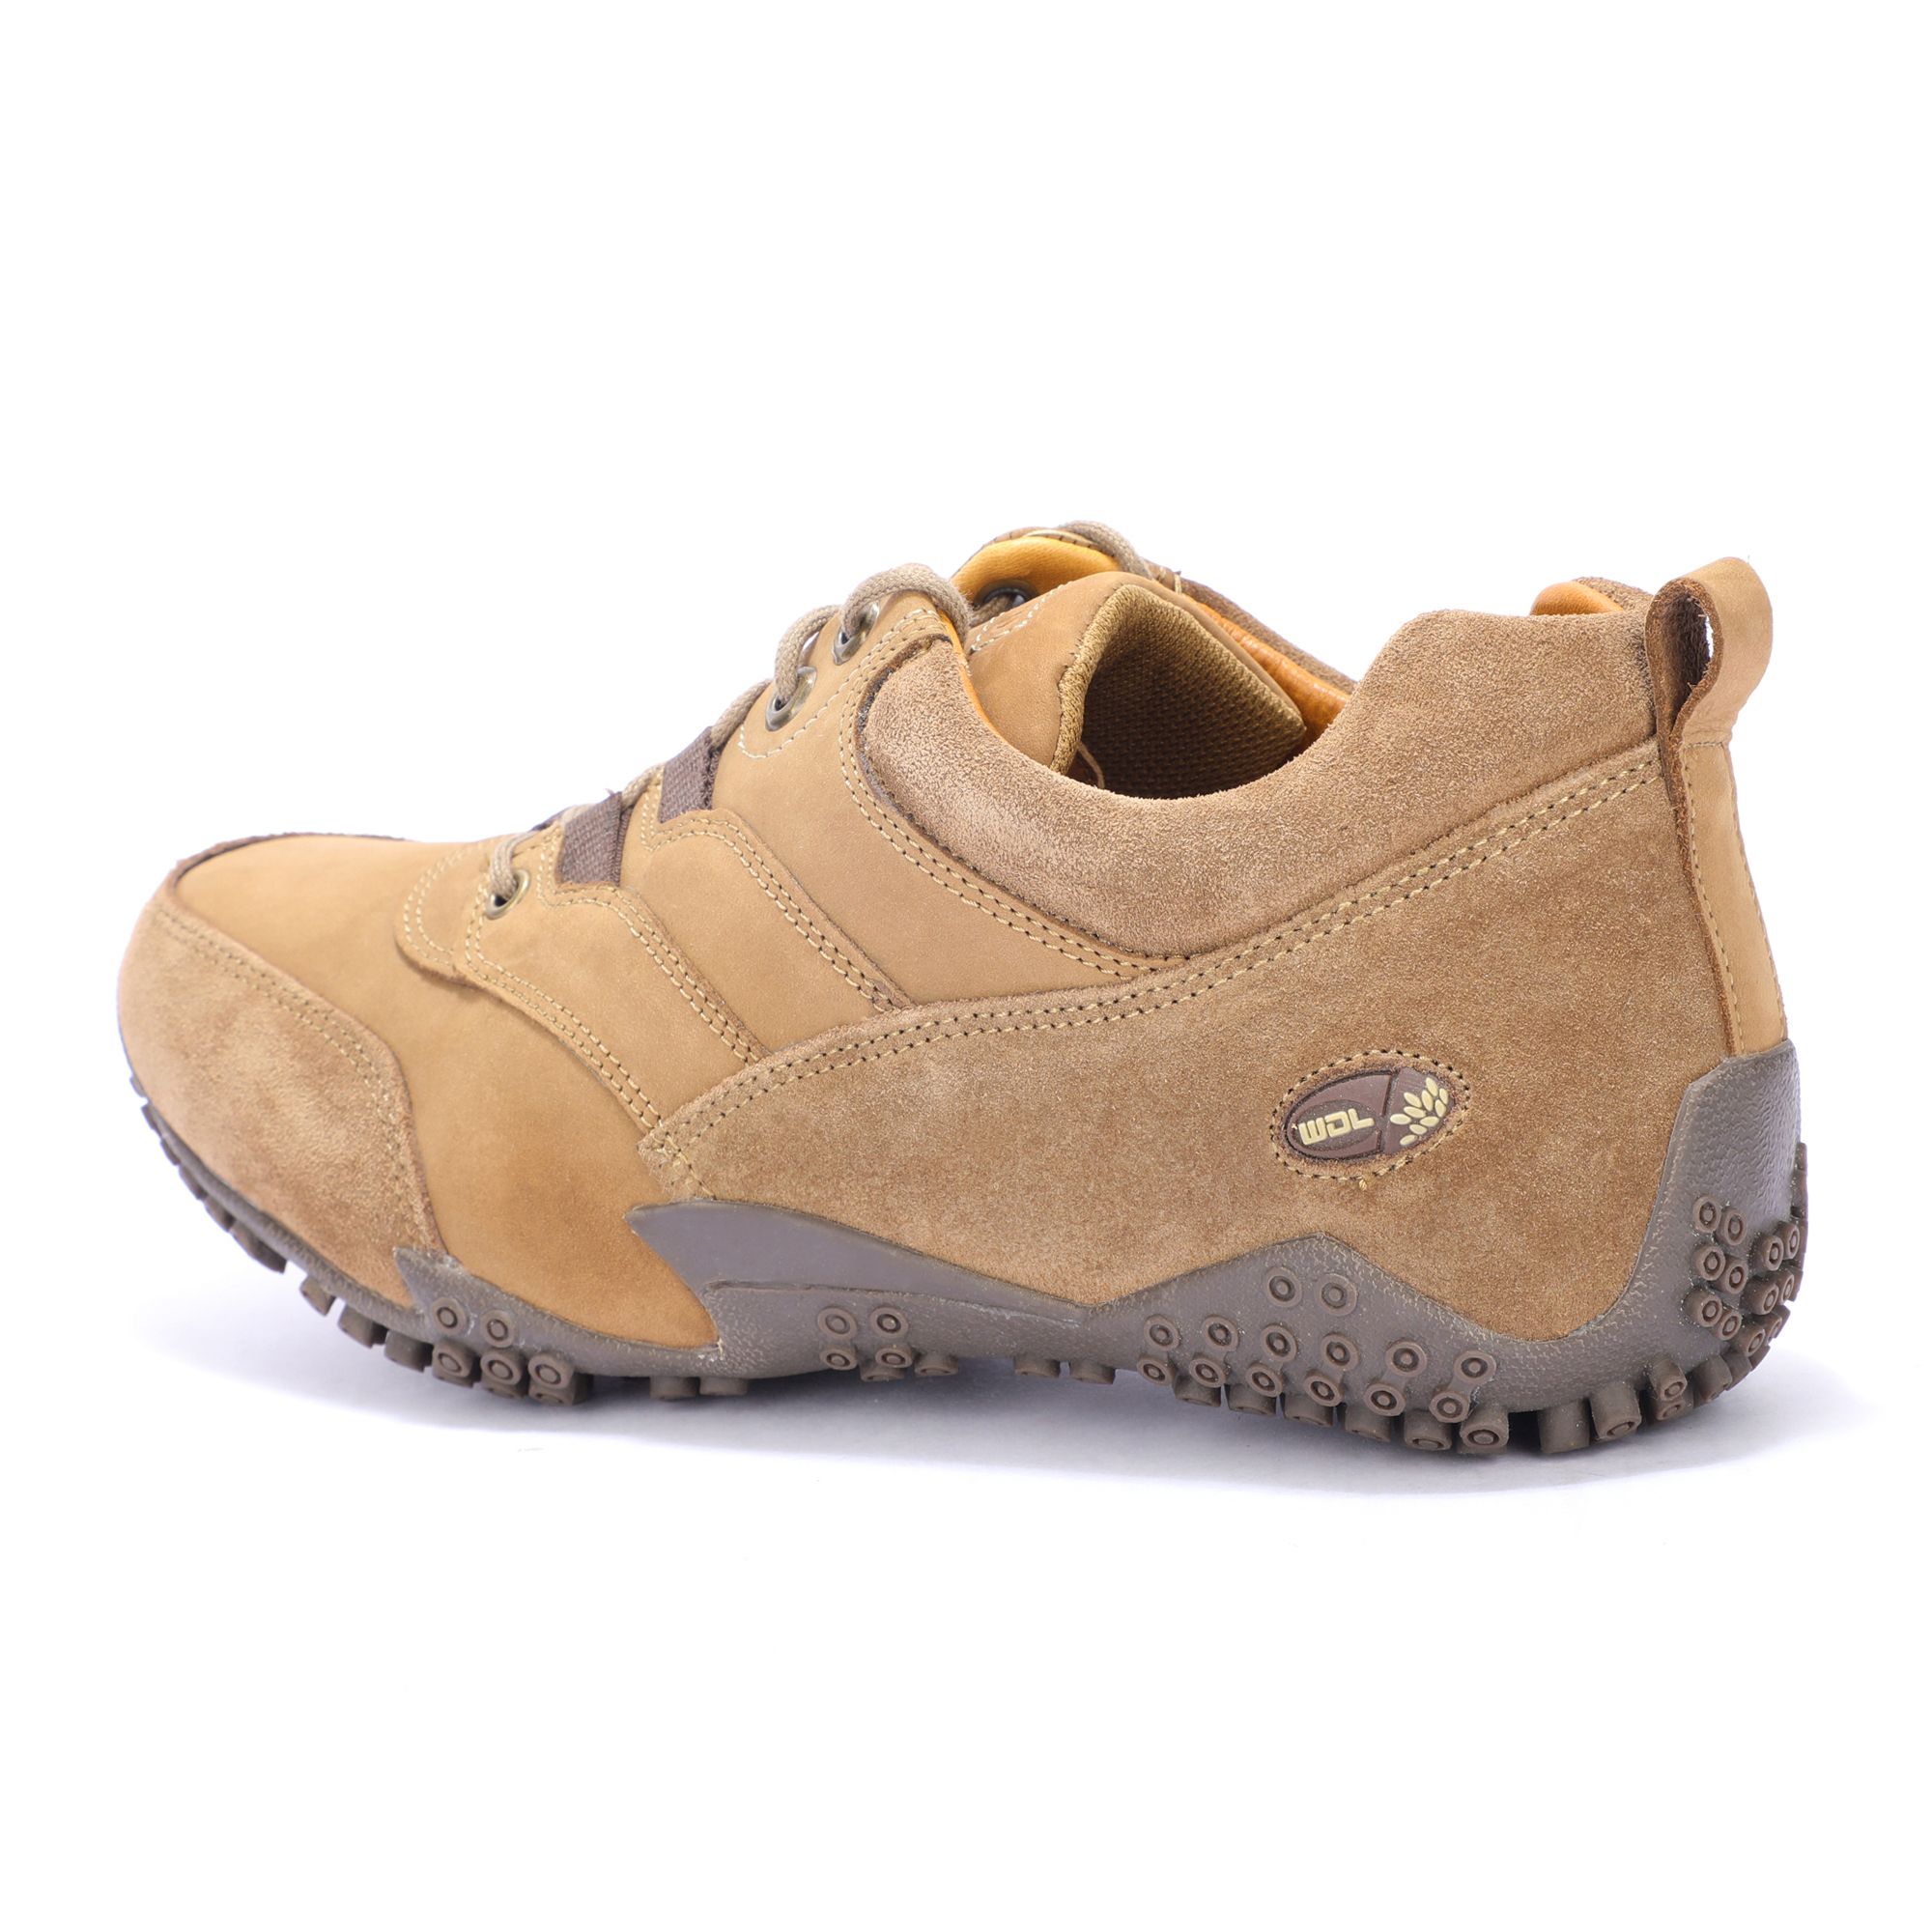 Woodland TOBACCO outdoor shoes